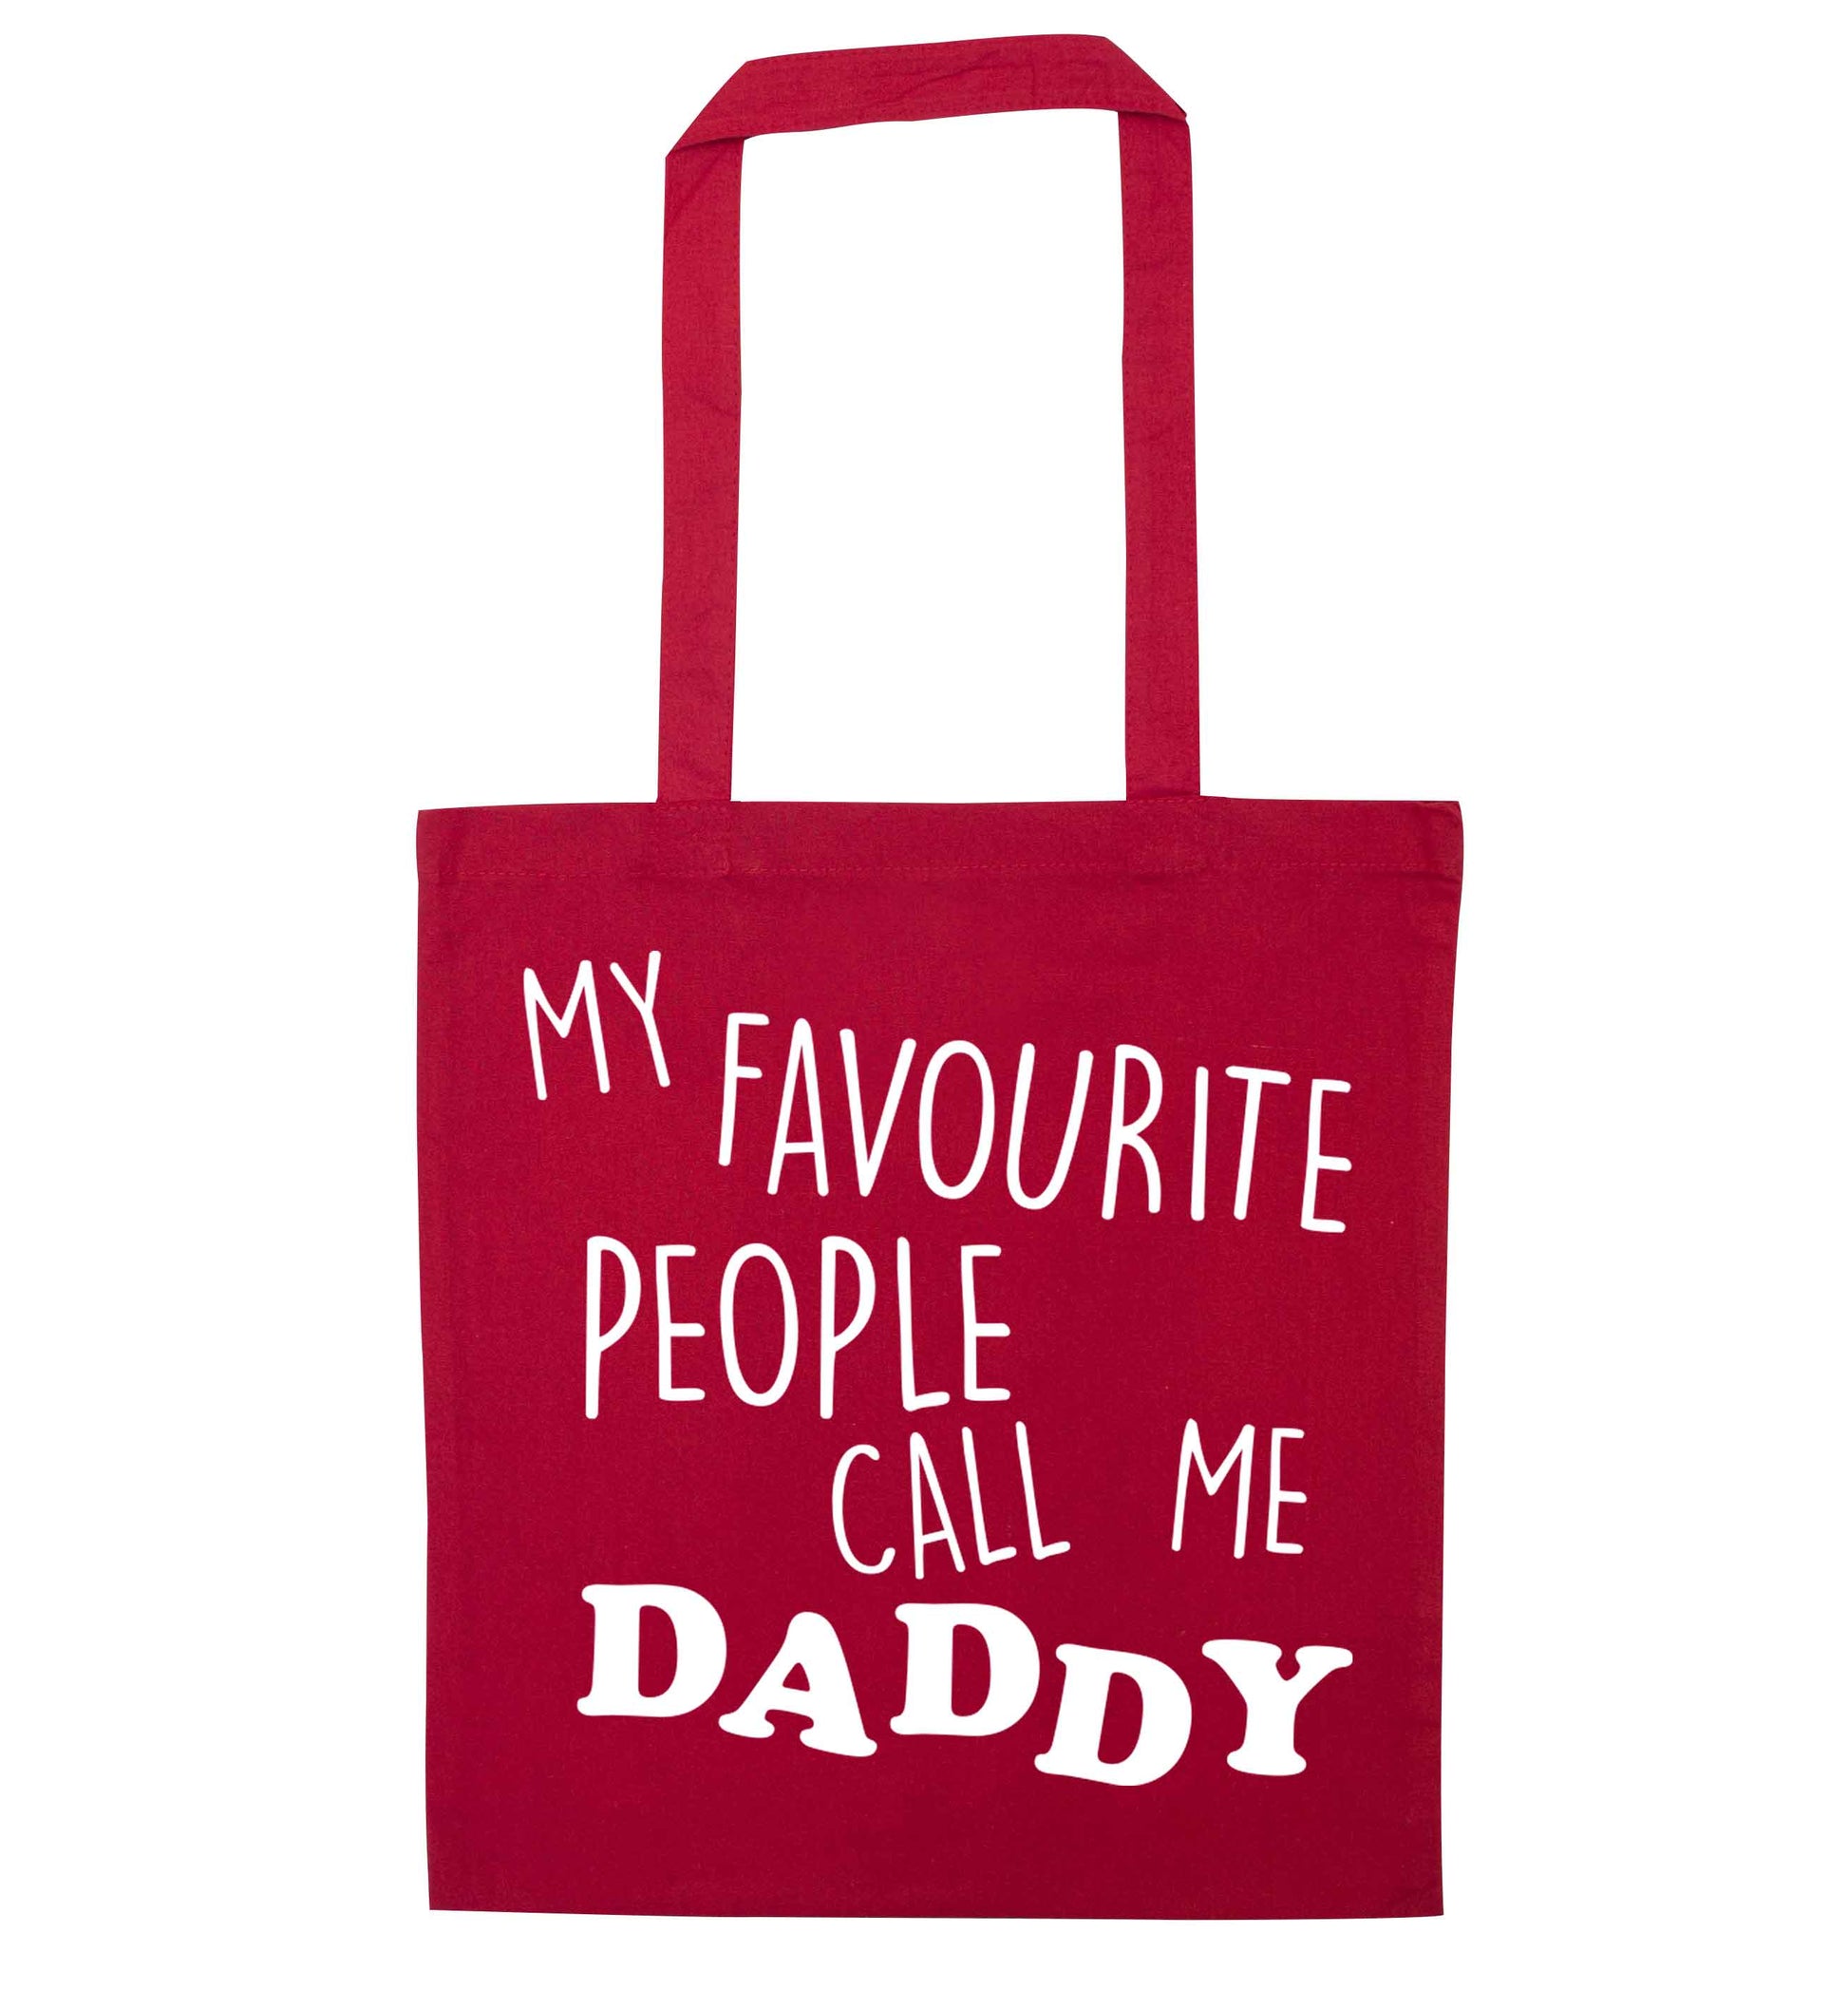 My favourite people call me daddy red tote bag